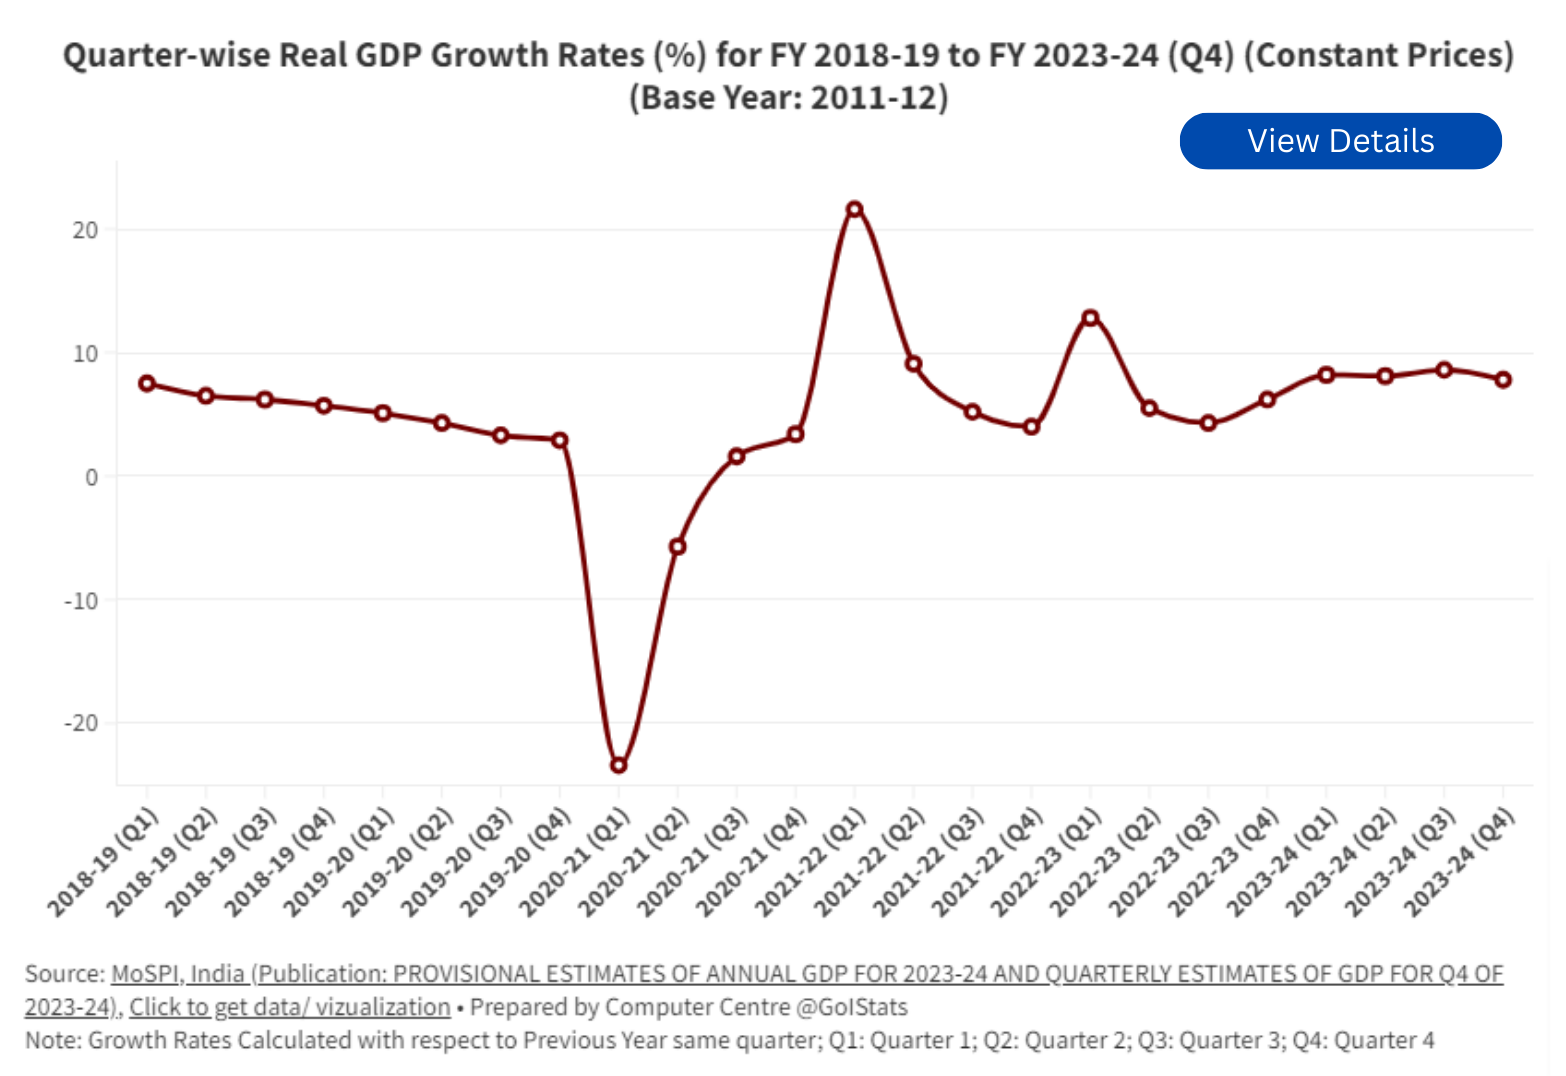 Quarter-wise Real GDP Growth Rates (%) for FY 2018-19 to FY 2023-24 (Q4) (Constant Prices))